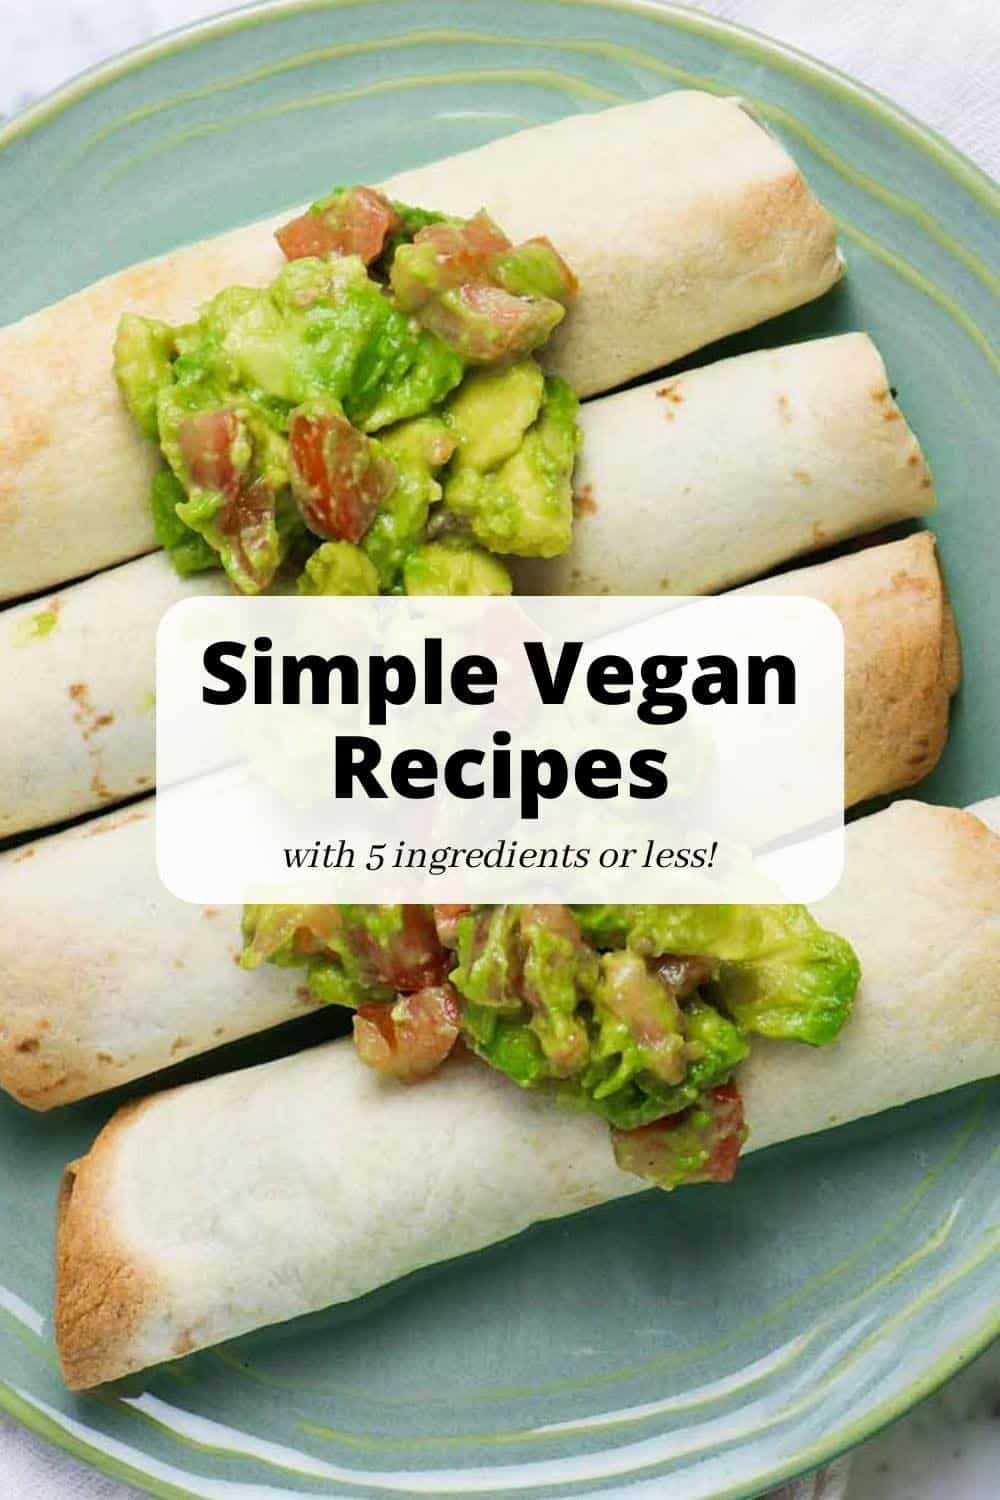 image of vegan taquitos with text that reads: Simple Vegan Recipes with 5 ingredients or less!